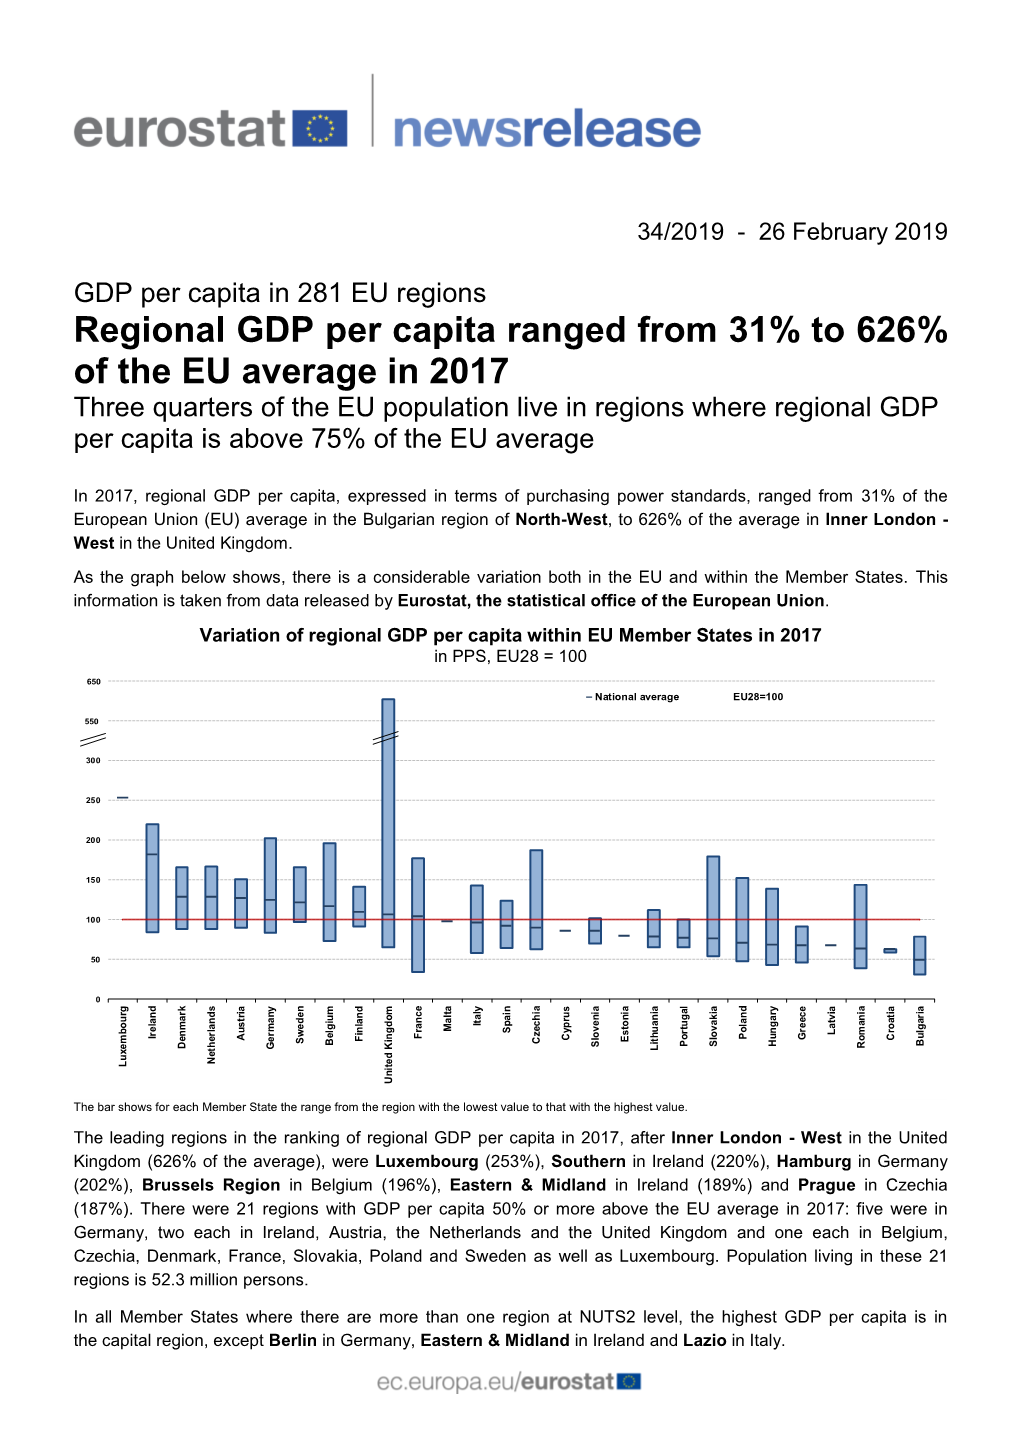 Regional GDP Per Capita Ranged from 31% to 626% of the EU